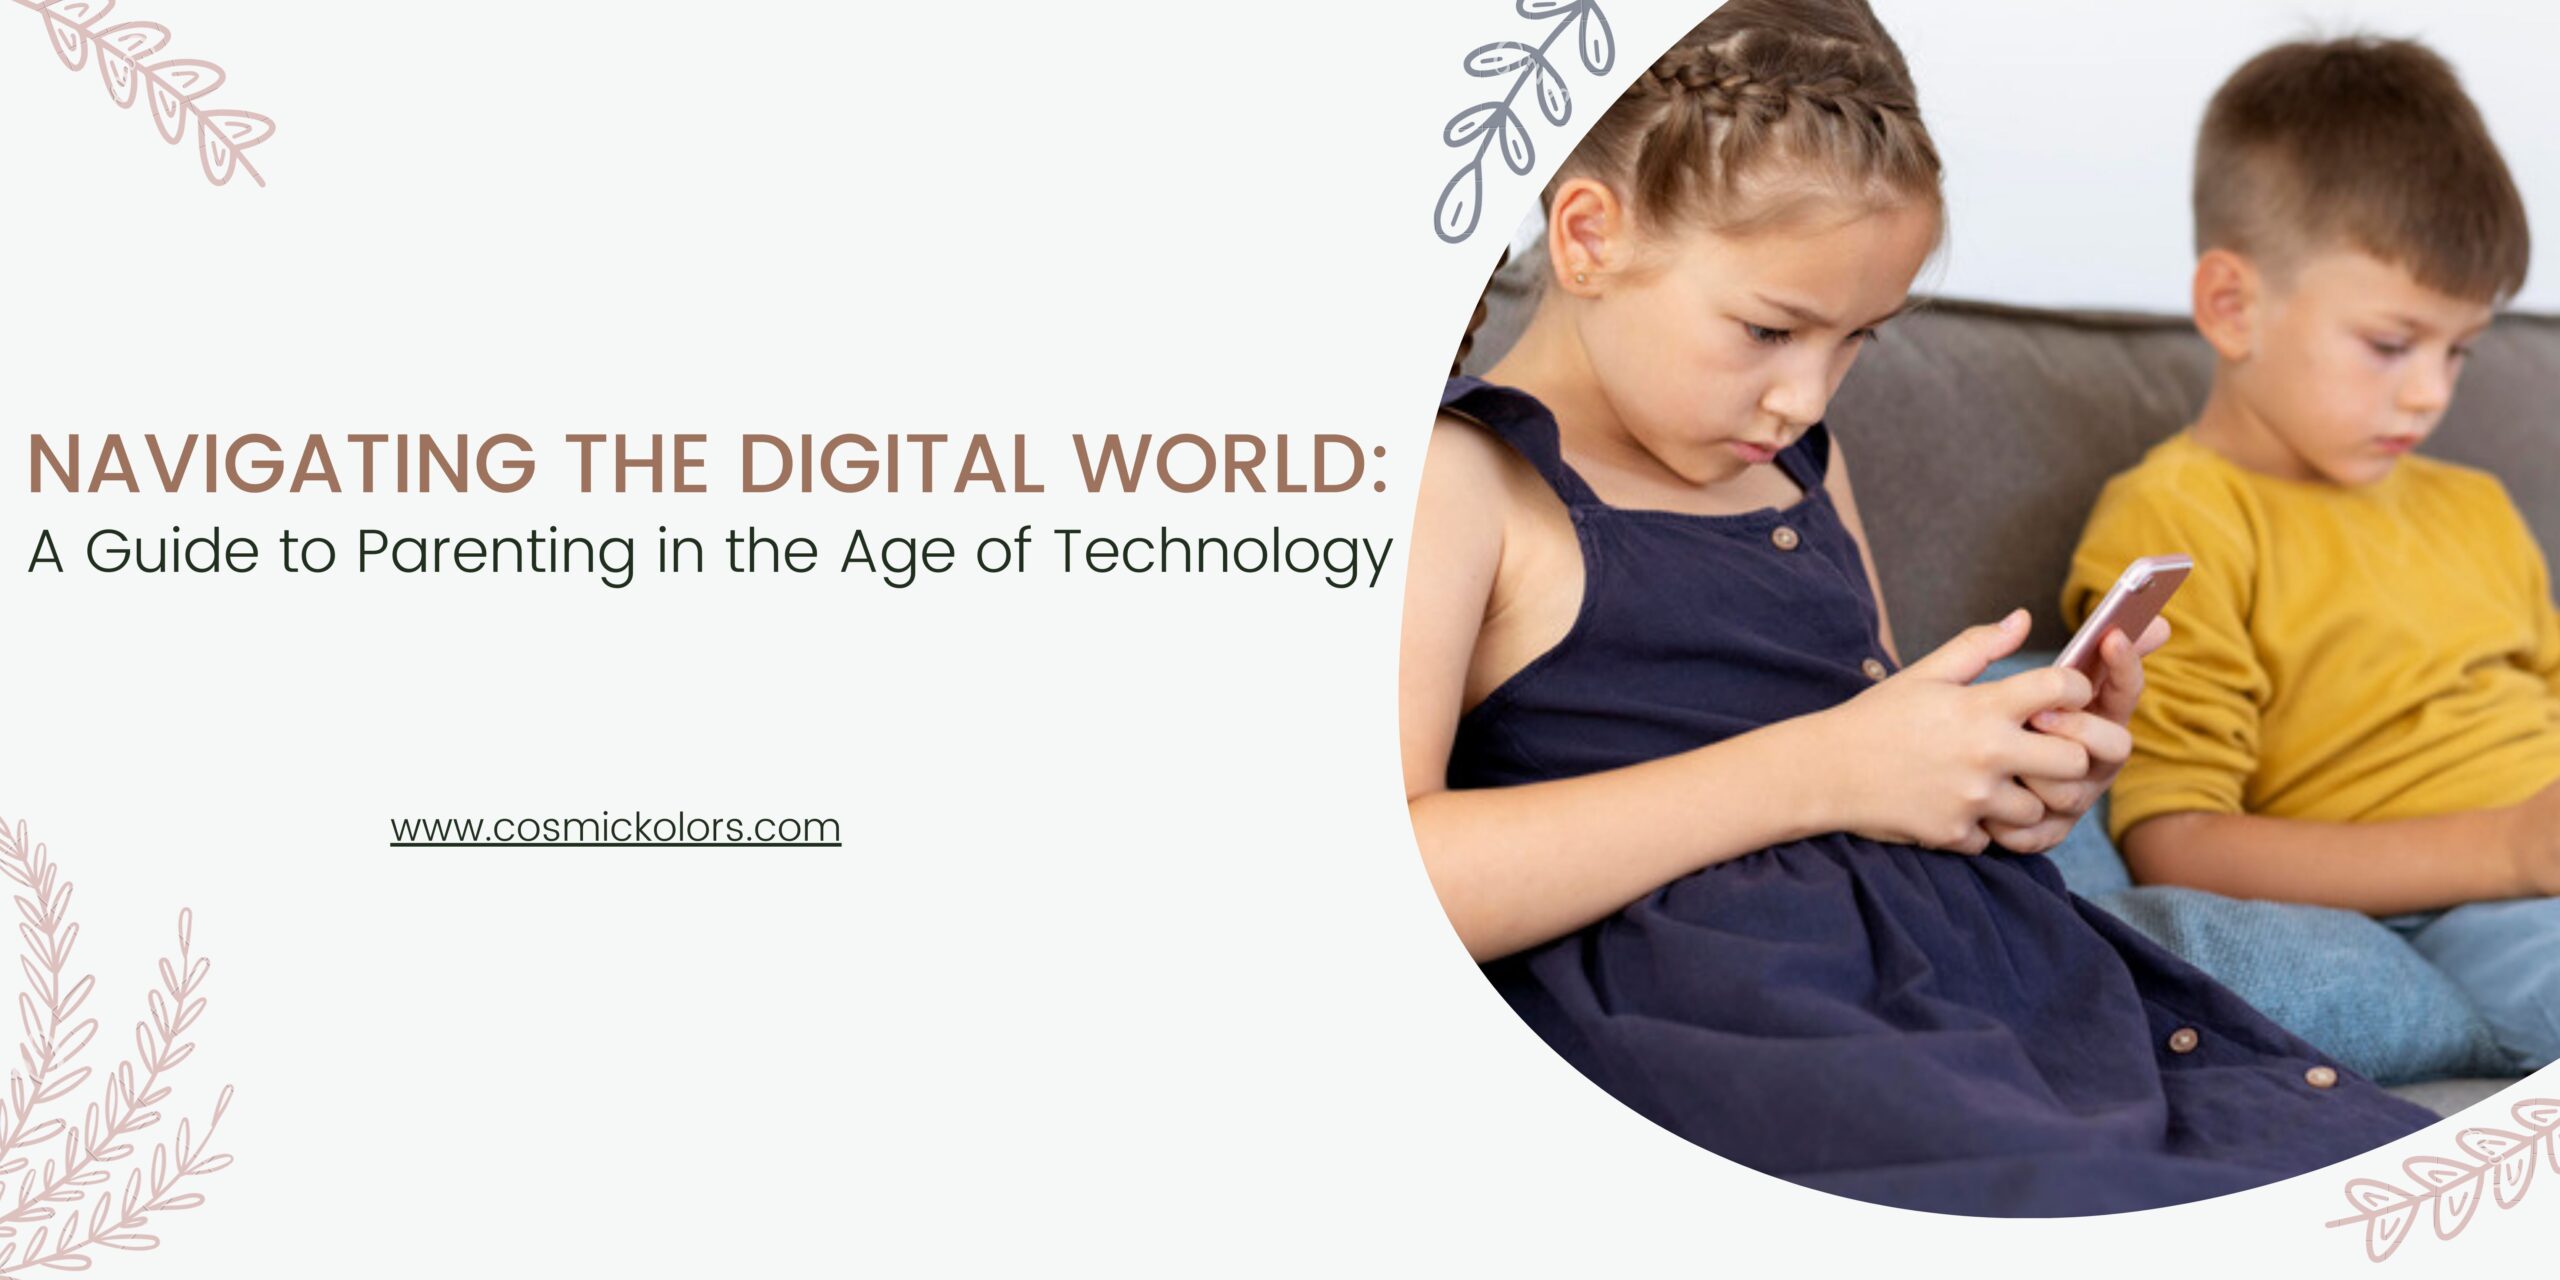 Navigating the Digital World: A Guide to Parenting in the Age of Technology